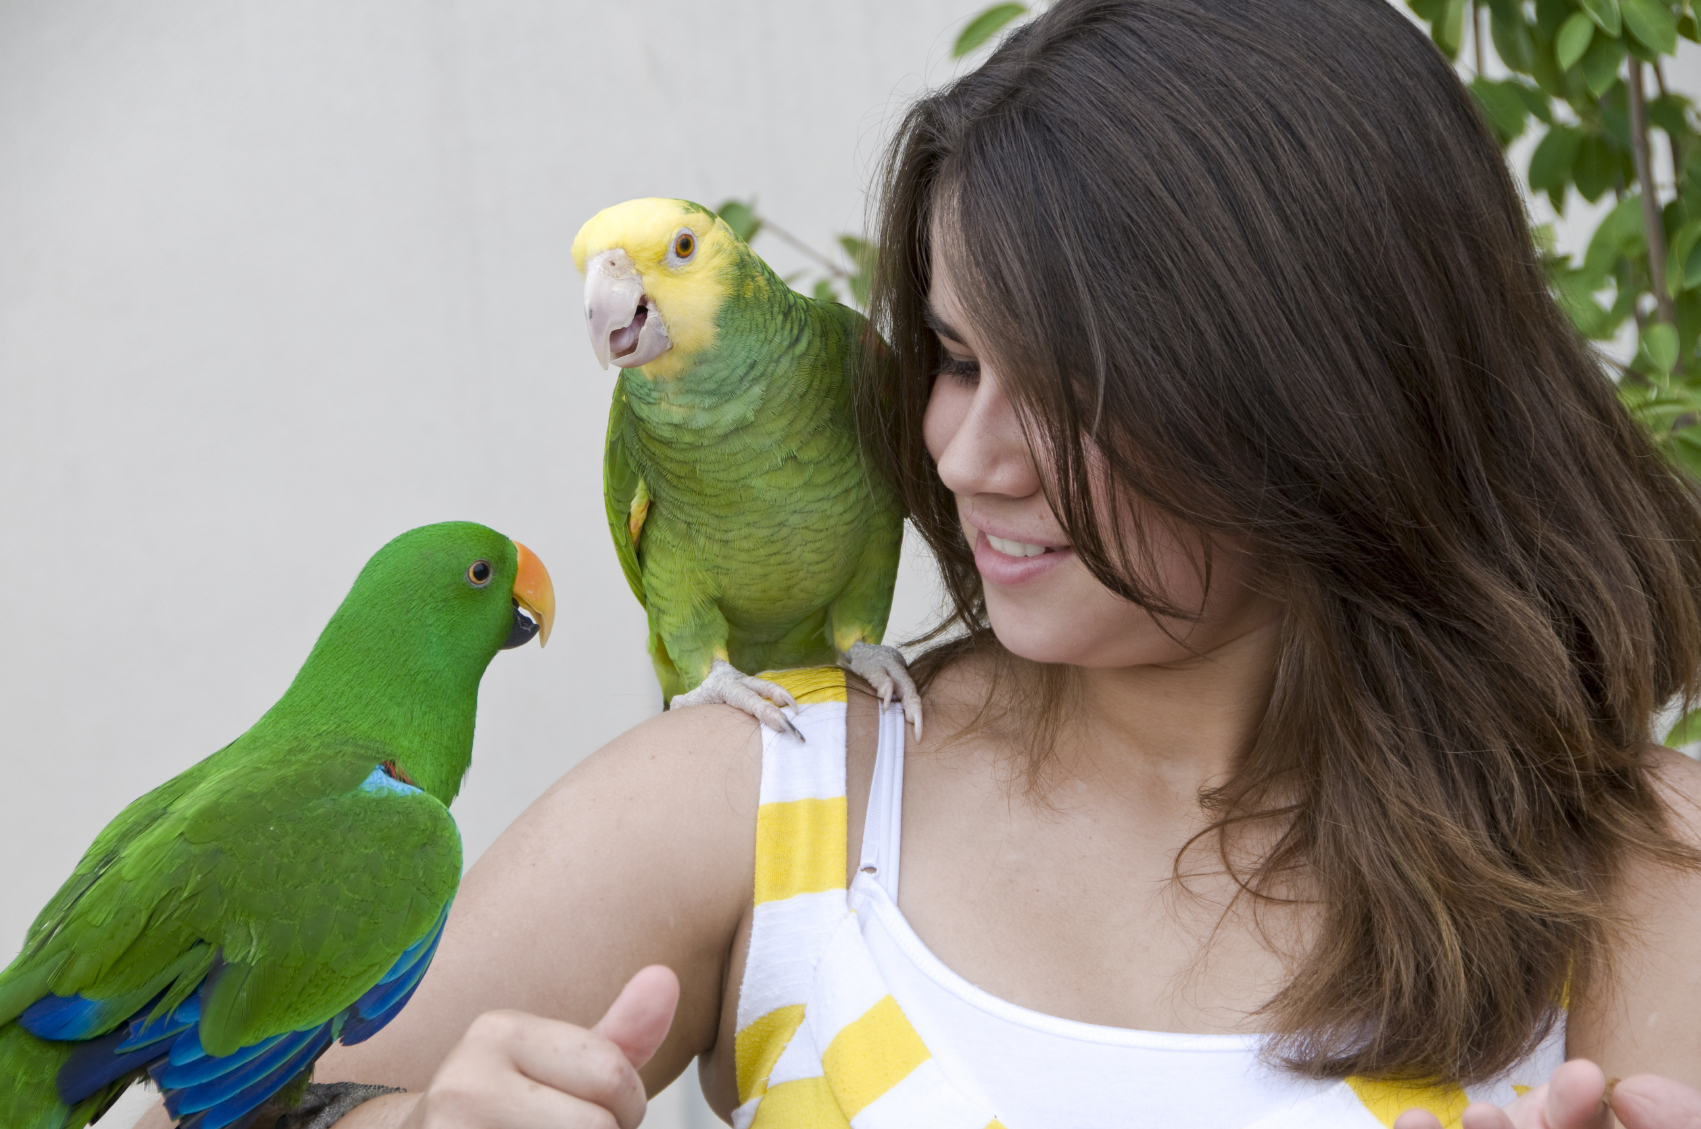 A teen caucasian girl is holding two exotic pet parrots. Electic parrot and amazon parrot. Girl is smiling and looking at one of the birds.